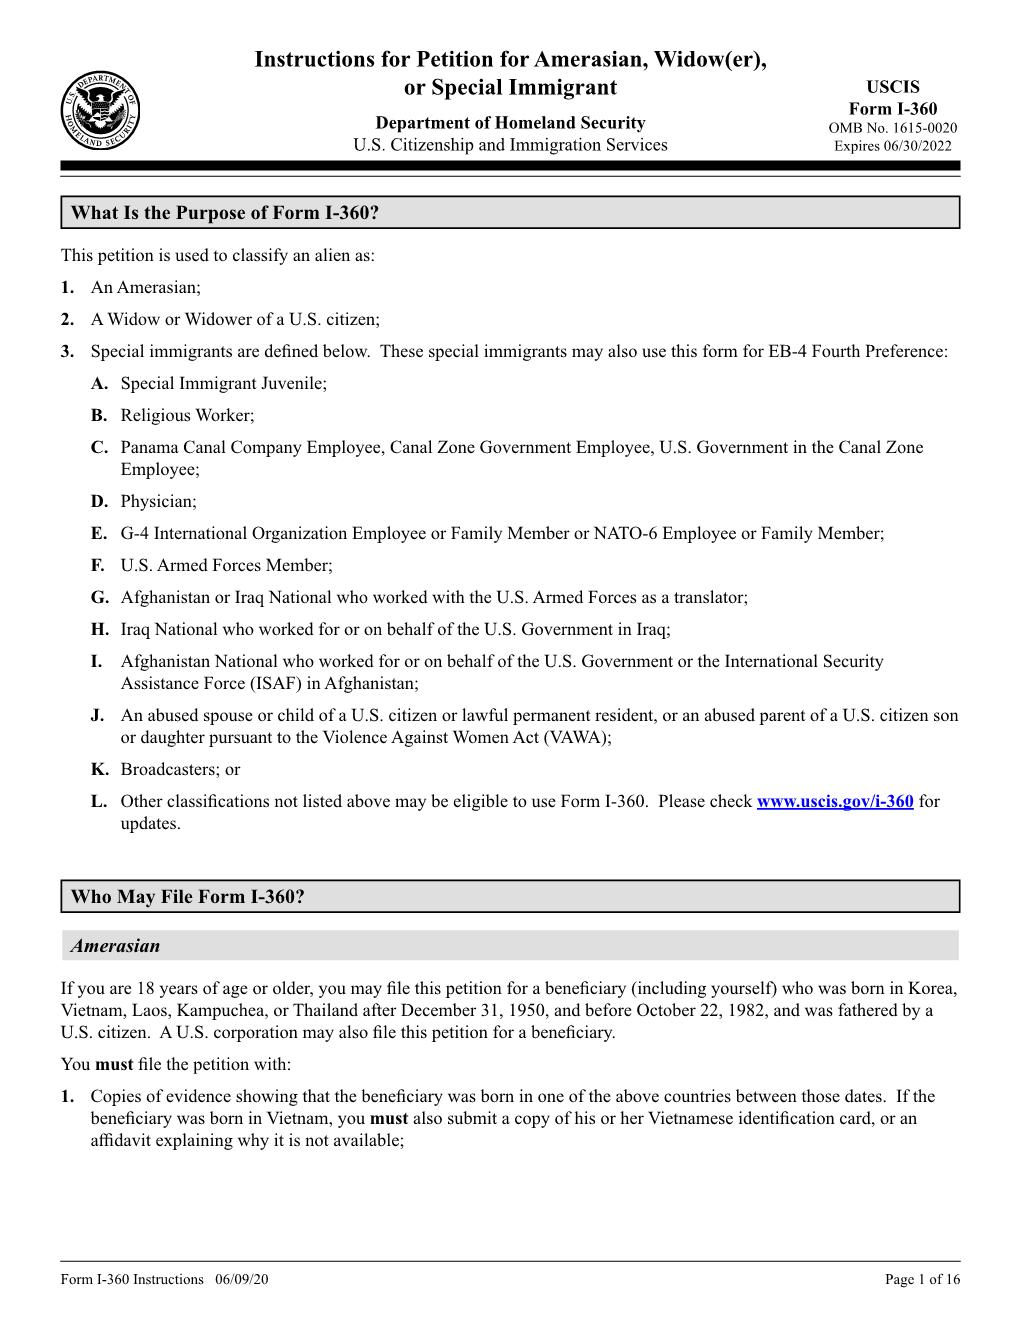 Form I-360, Petition for Amerasian, Widower(Er), Or Special Immigrant